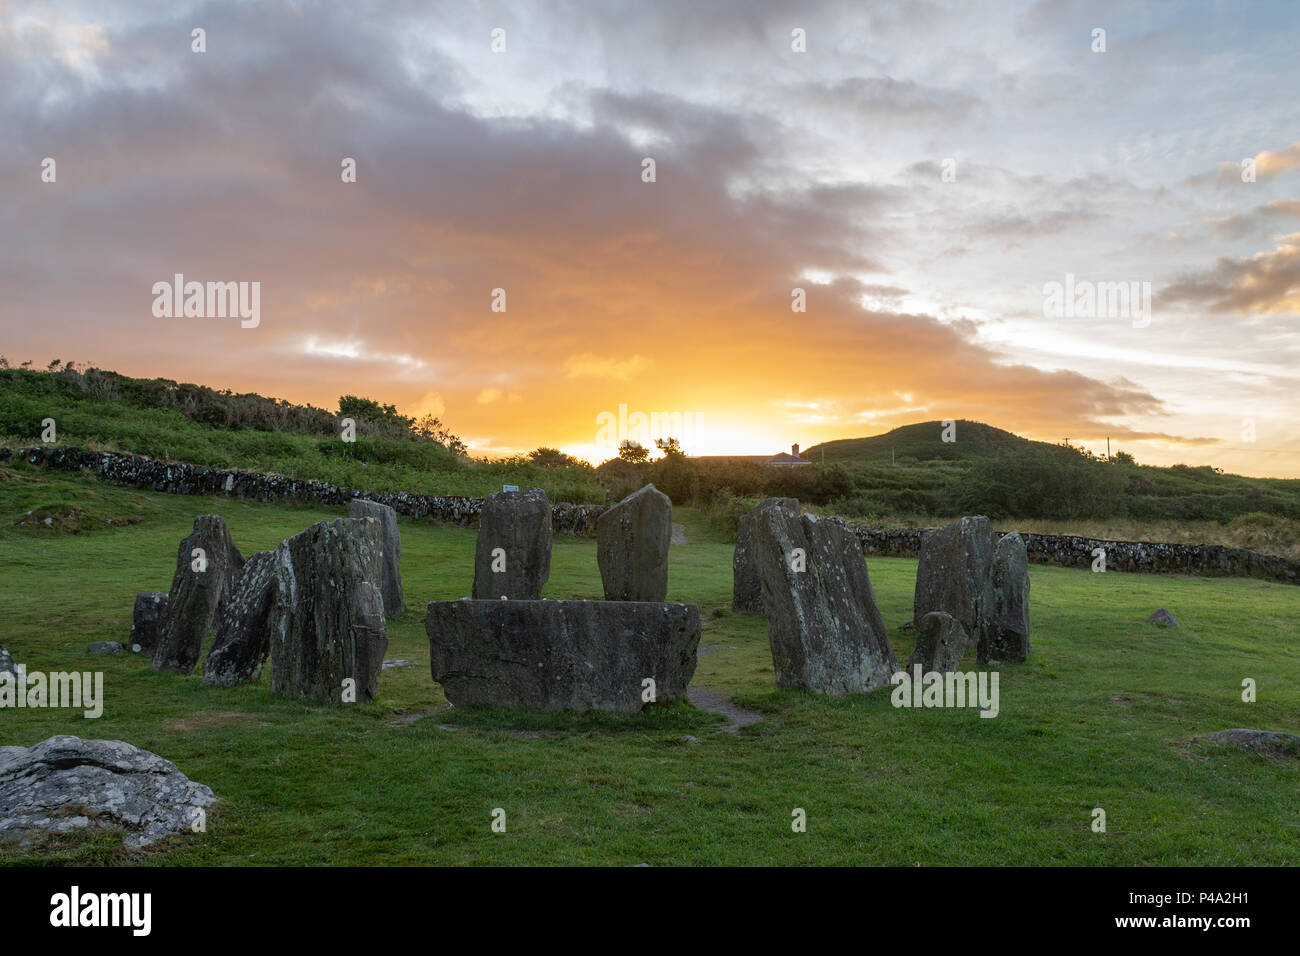 The sun rise over the Drombeg Stone Circle marking the start of the summer solstice, the longest day of the year. Drombeg is an ancient stone circle near Glandore, believed to be among other things a bronze age calendar marking the winter solstice when the sun sets over the Axial stone. Stock Photo